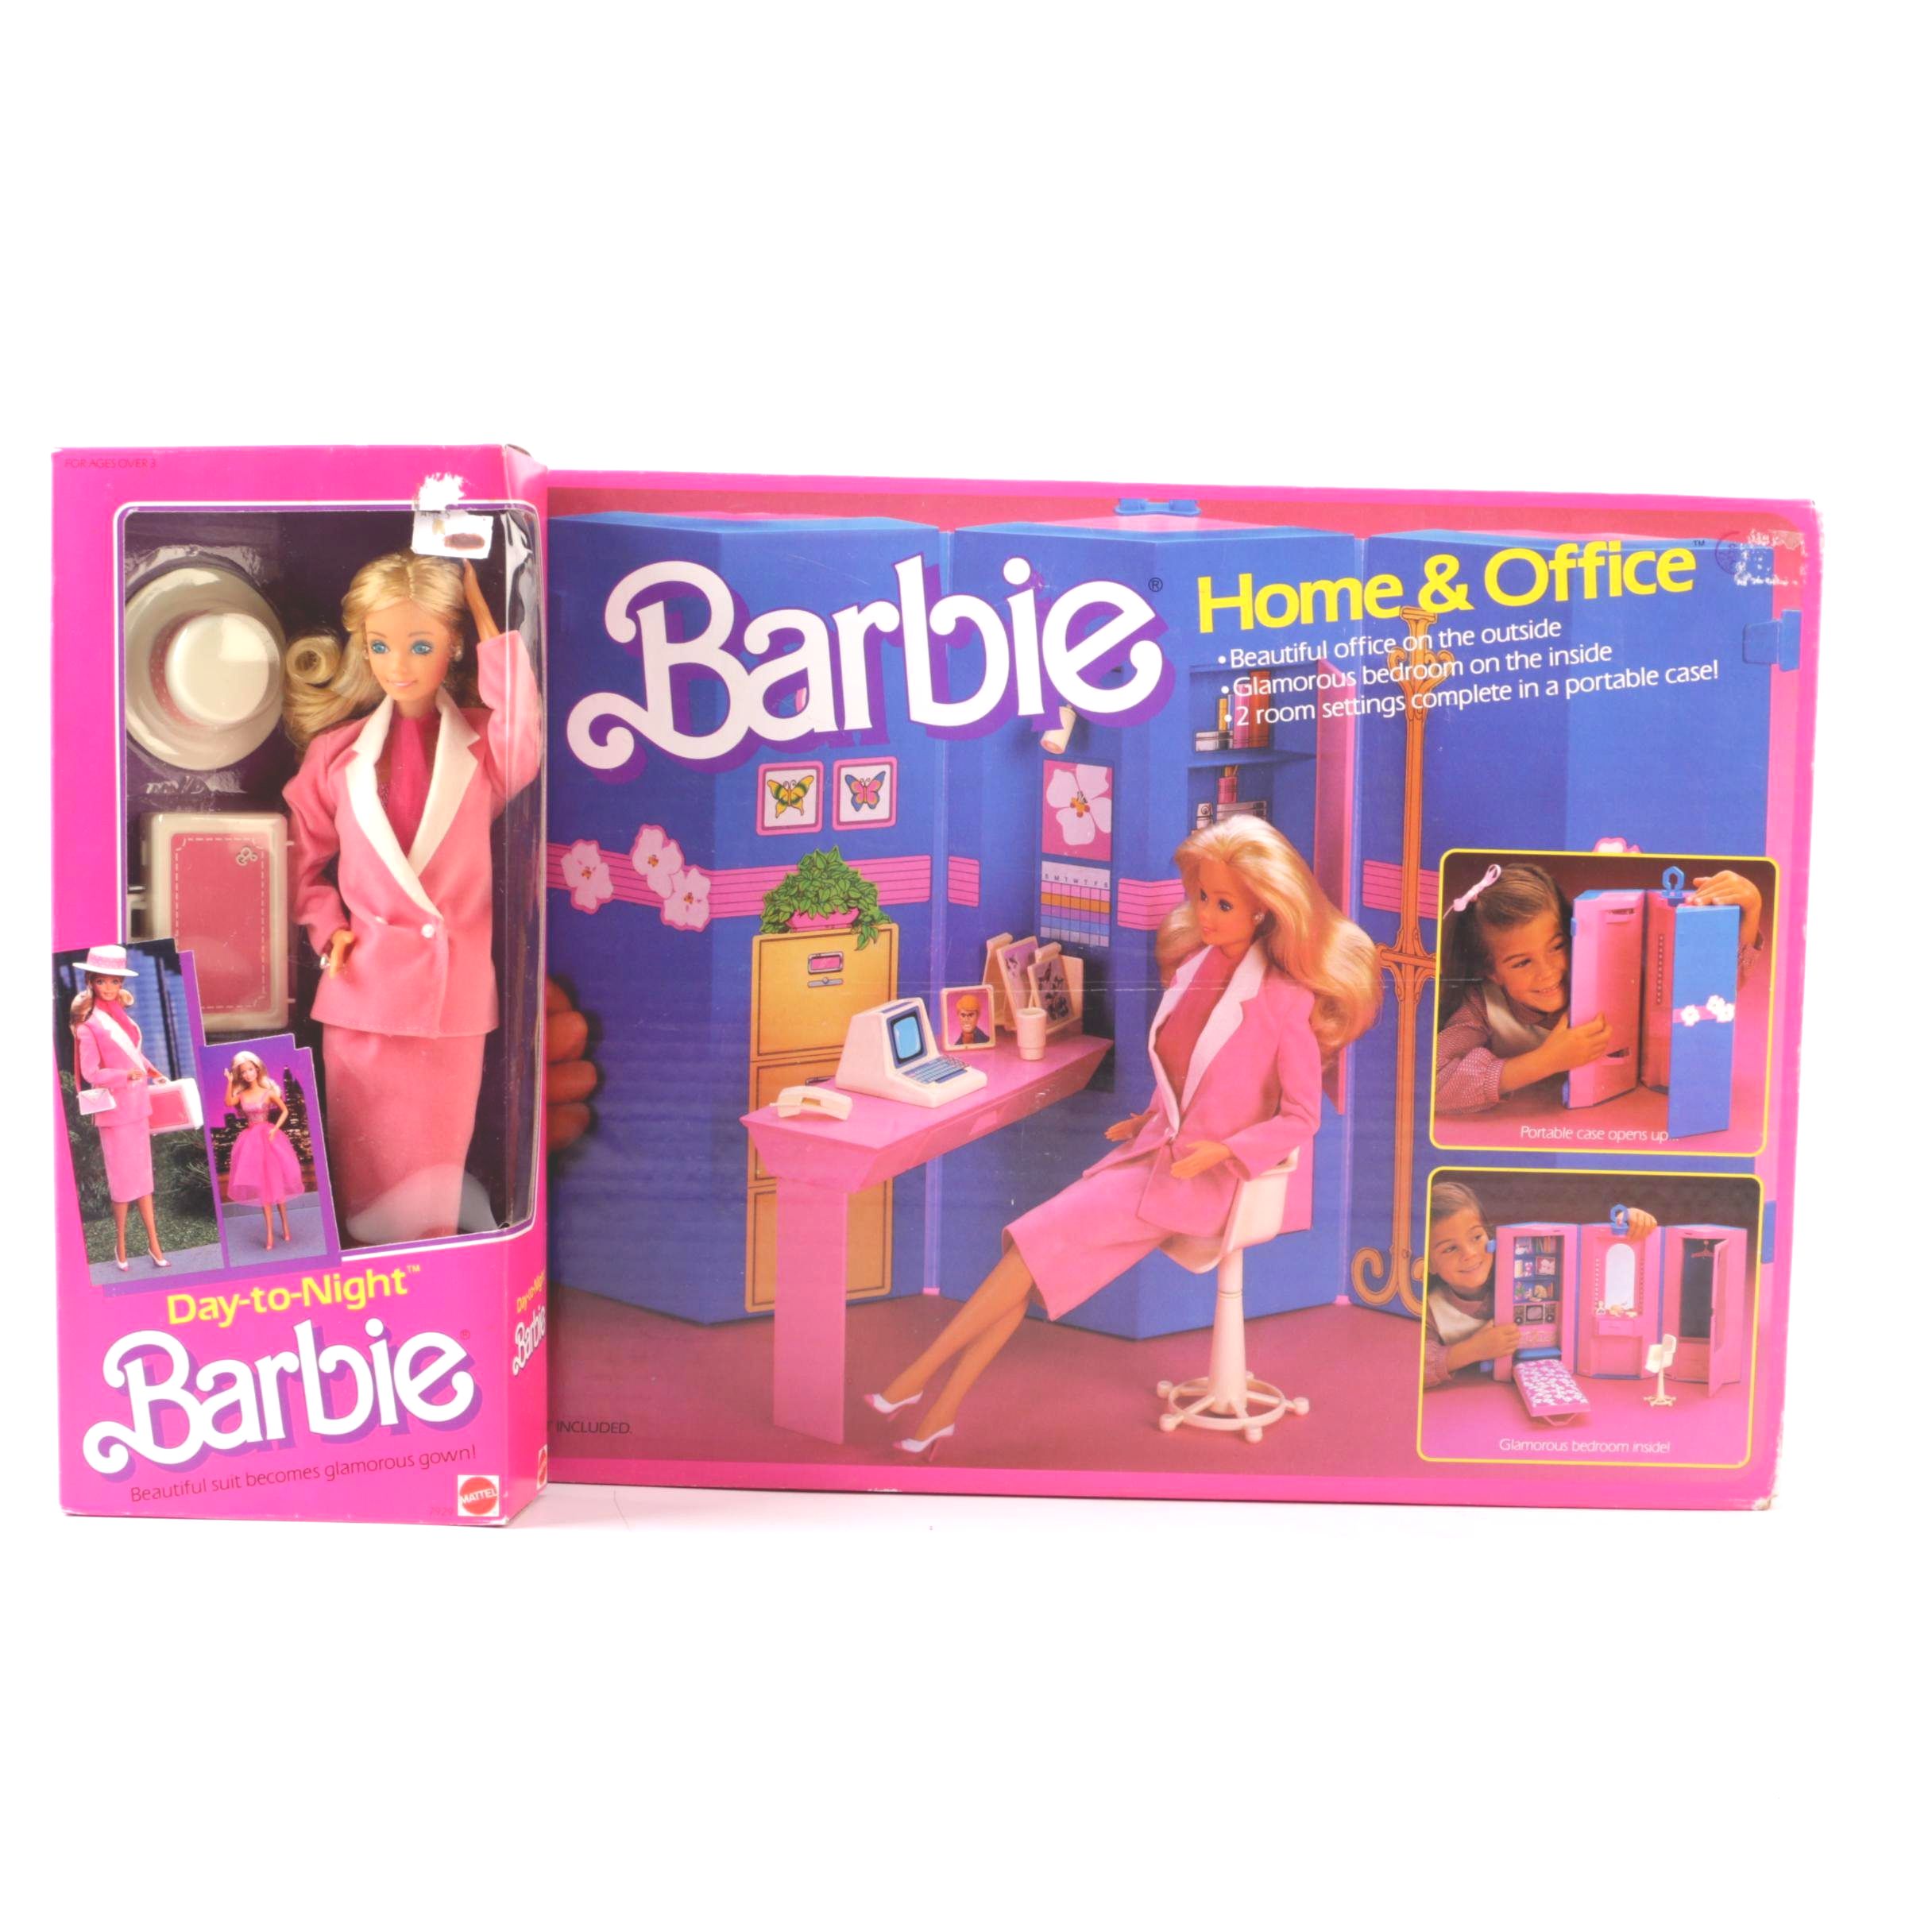 day to night barbie home & office